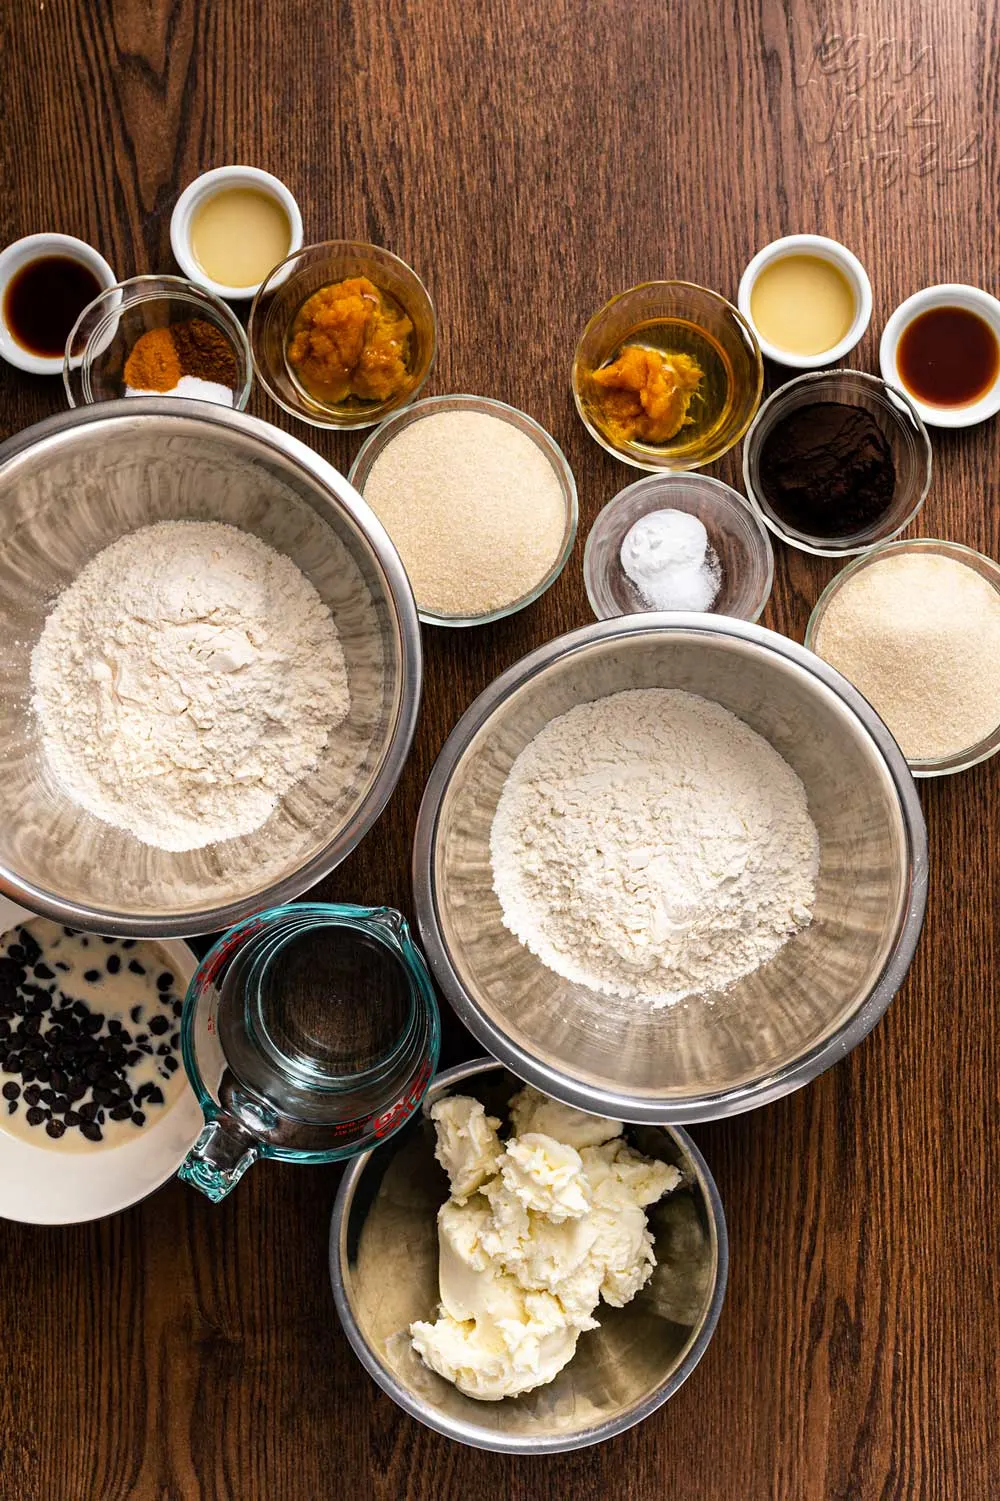 Many, many bowls of ingredients for cake